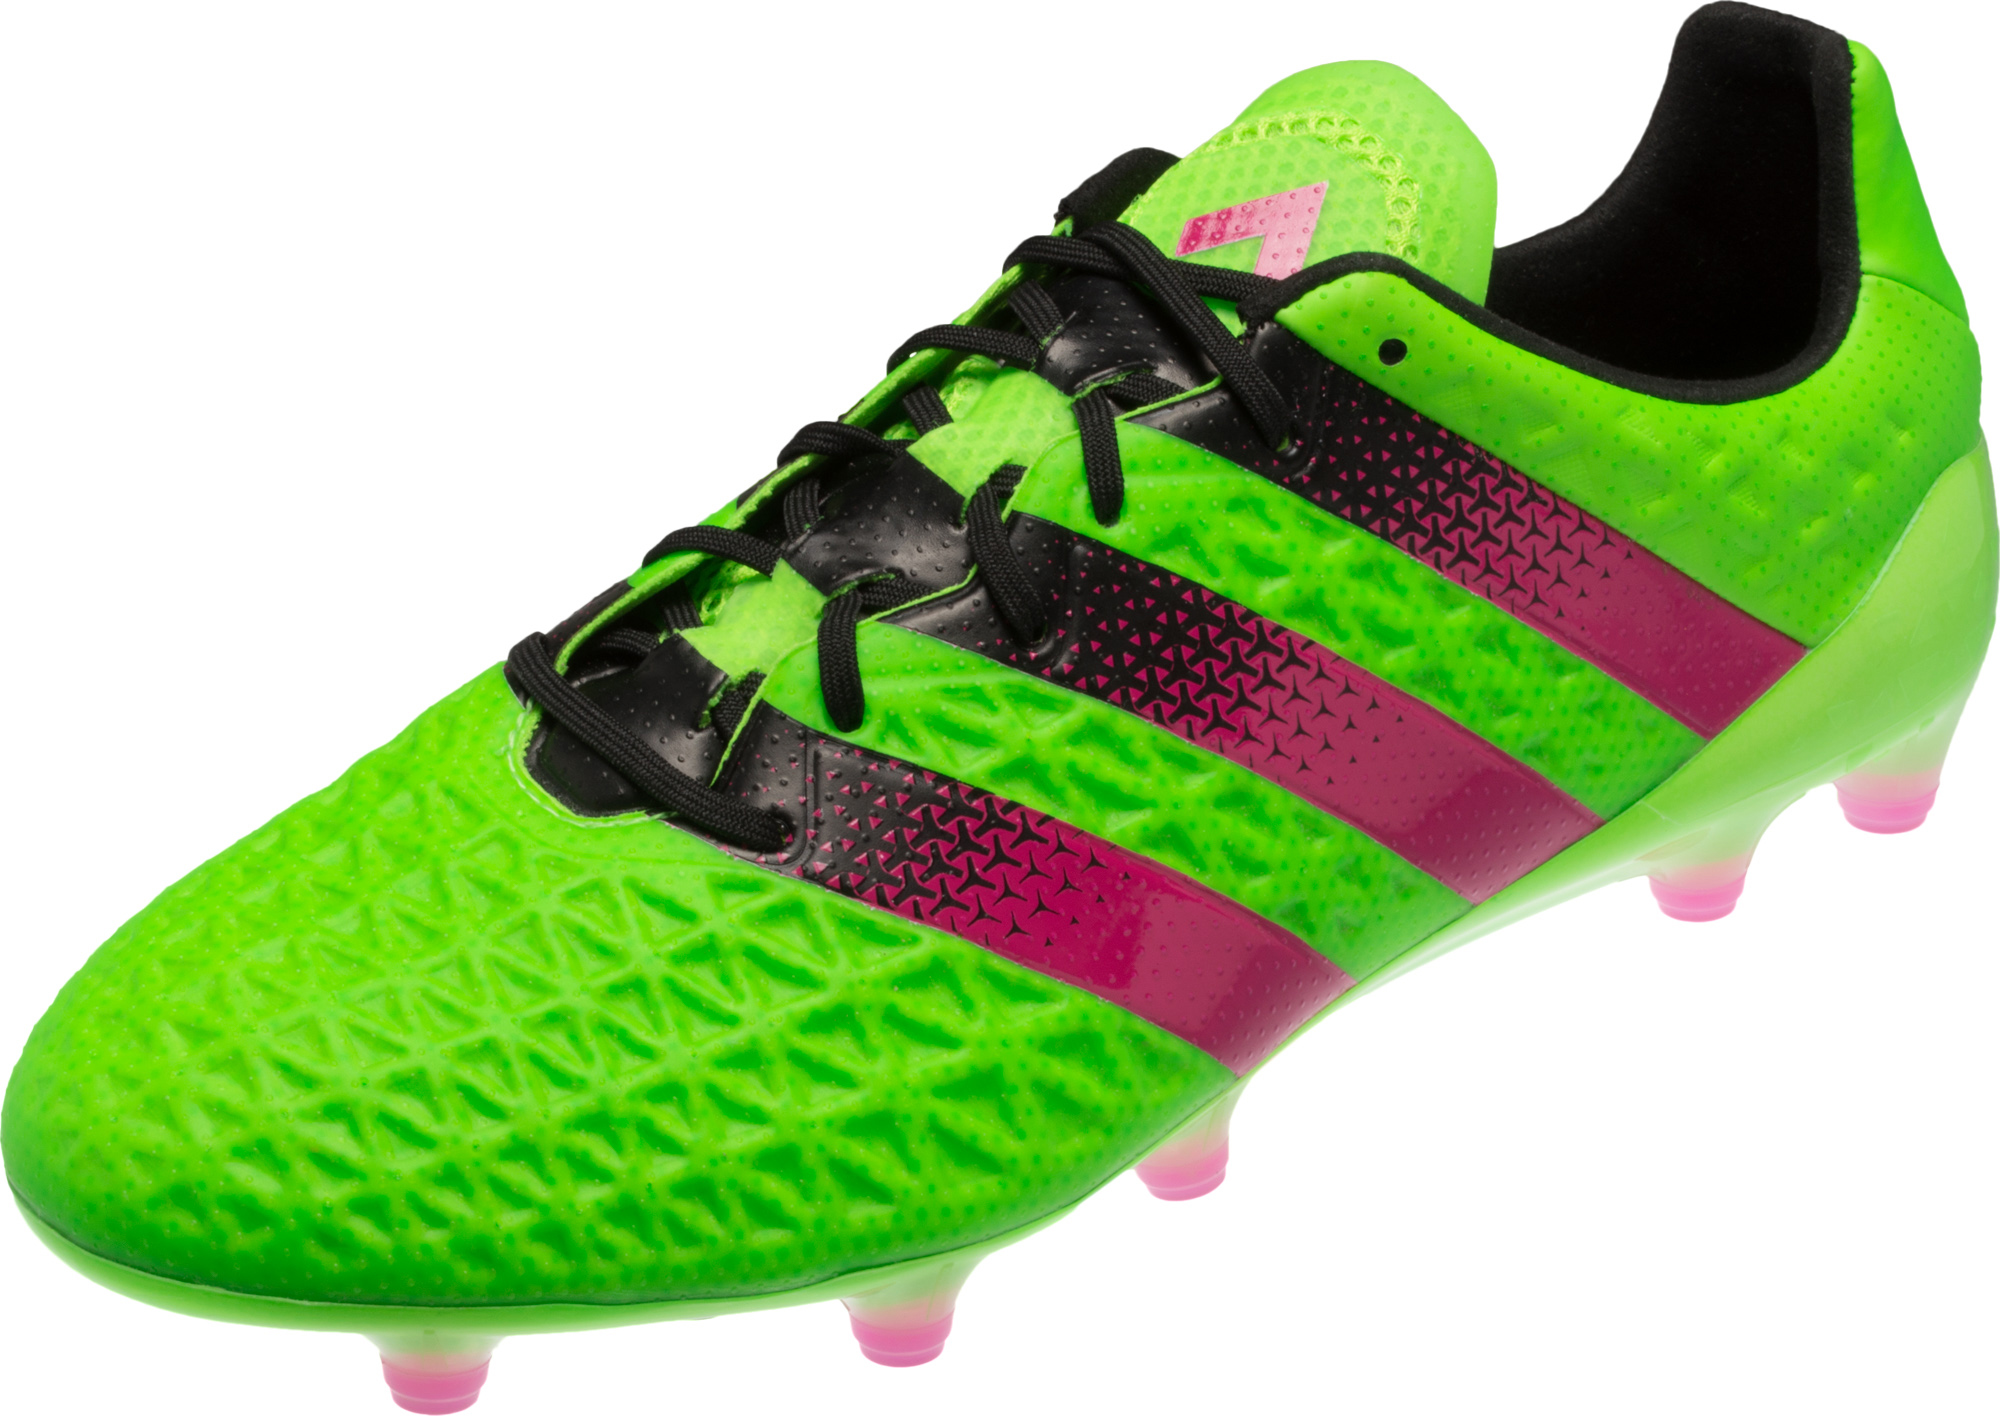 adidas 16.1 soccer cleats